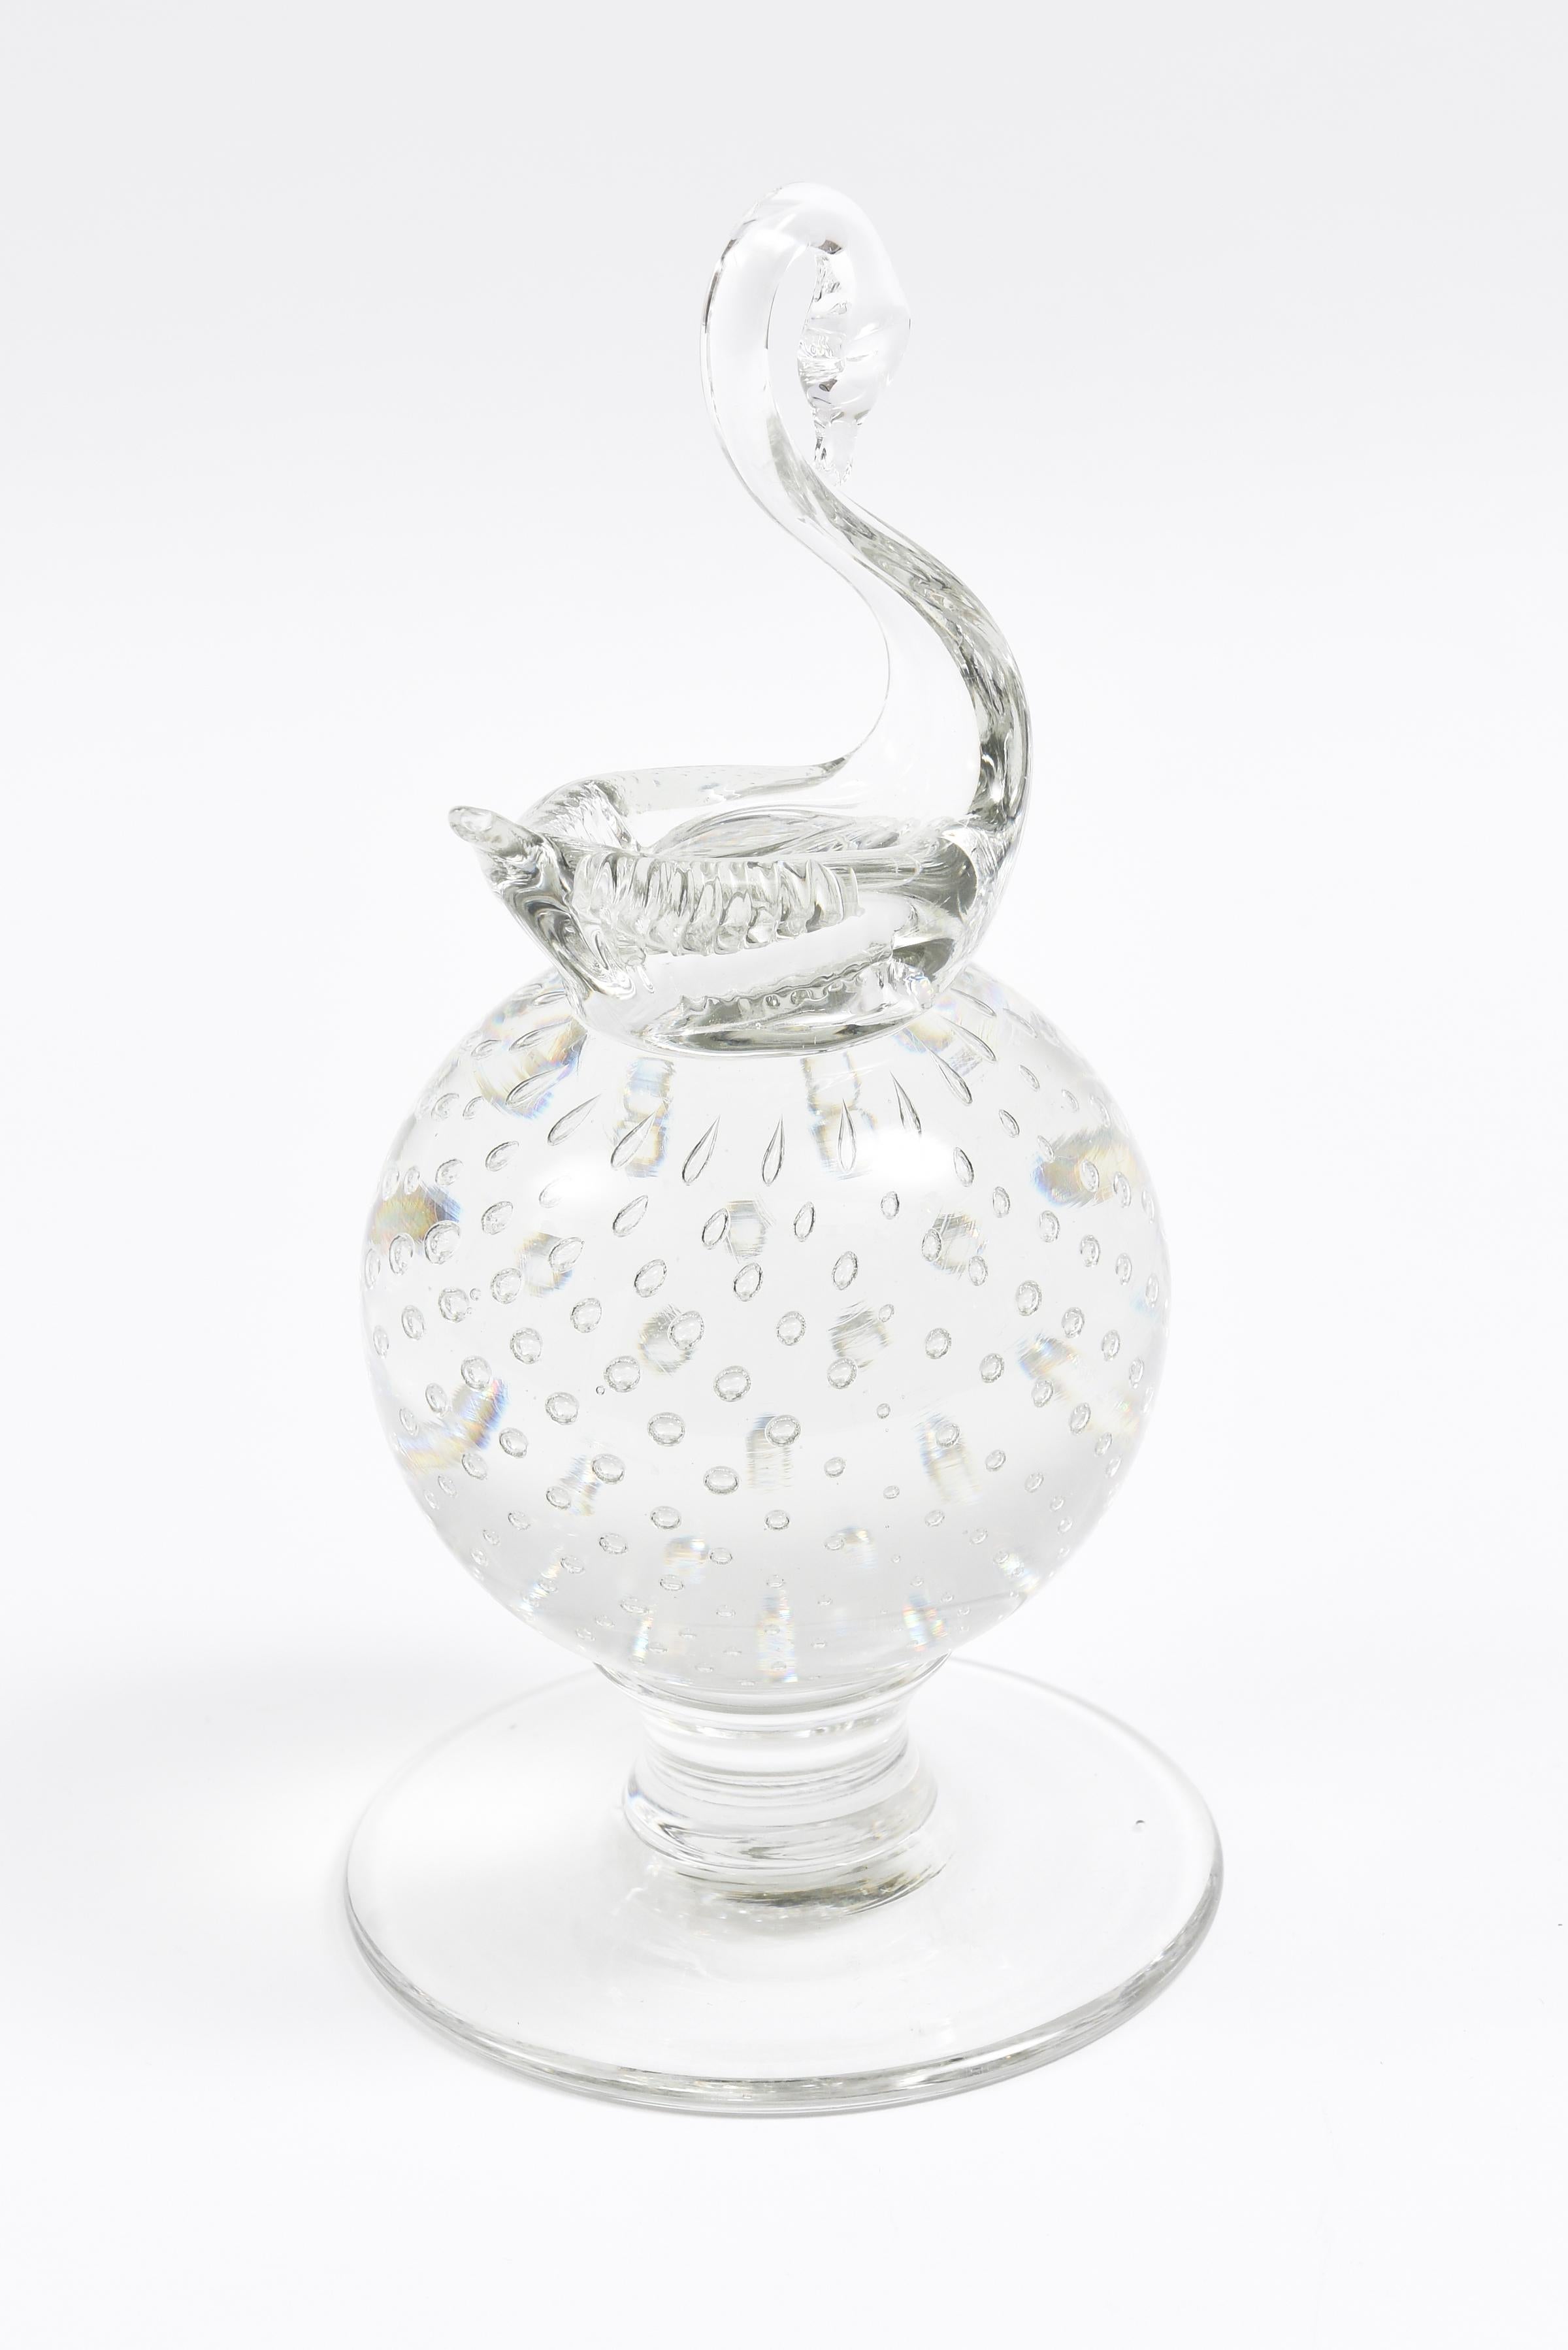 From America's oldest crystal manufacturer still in business, this is a beautifully blown piece of art. It features an elegant swan and Pairpoint's signature controlled bubble. In very good vintage condition.